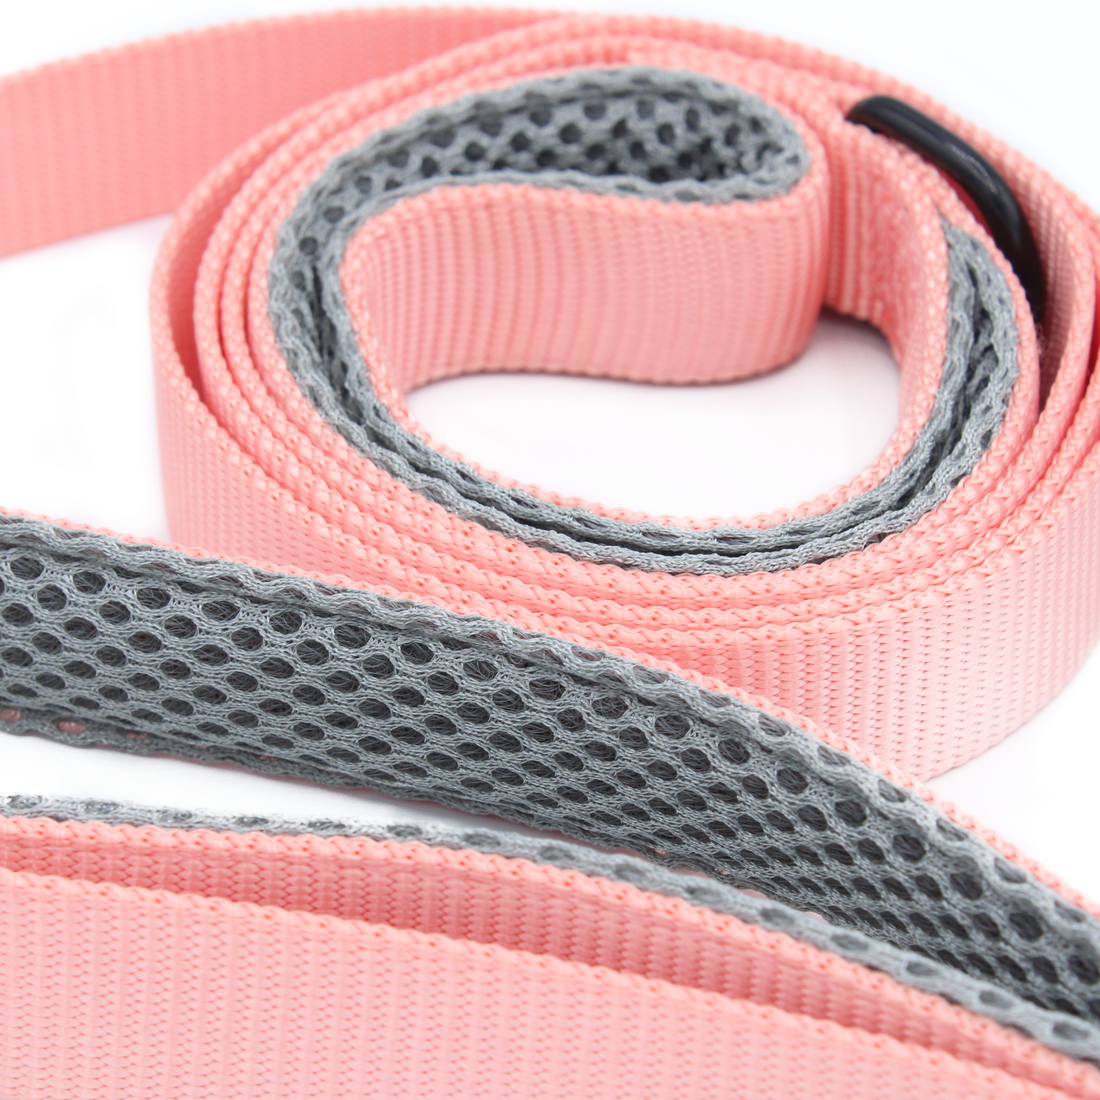 a peach colored leash with grey mesh, padded handles